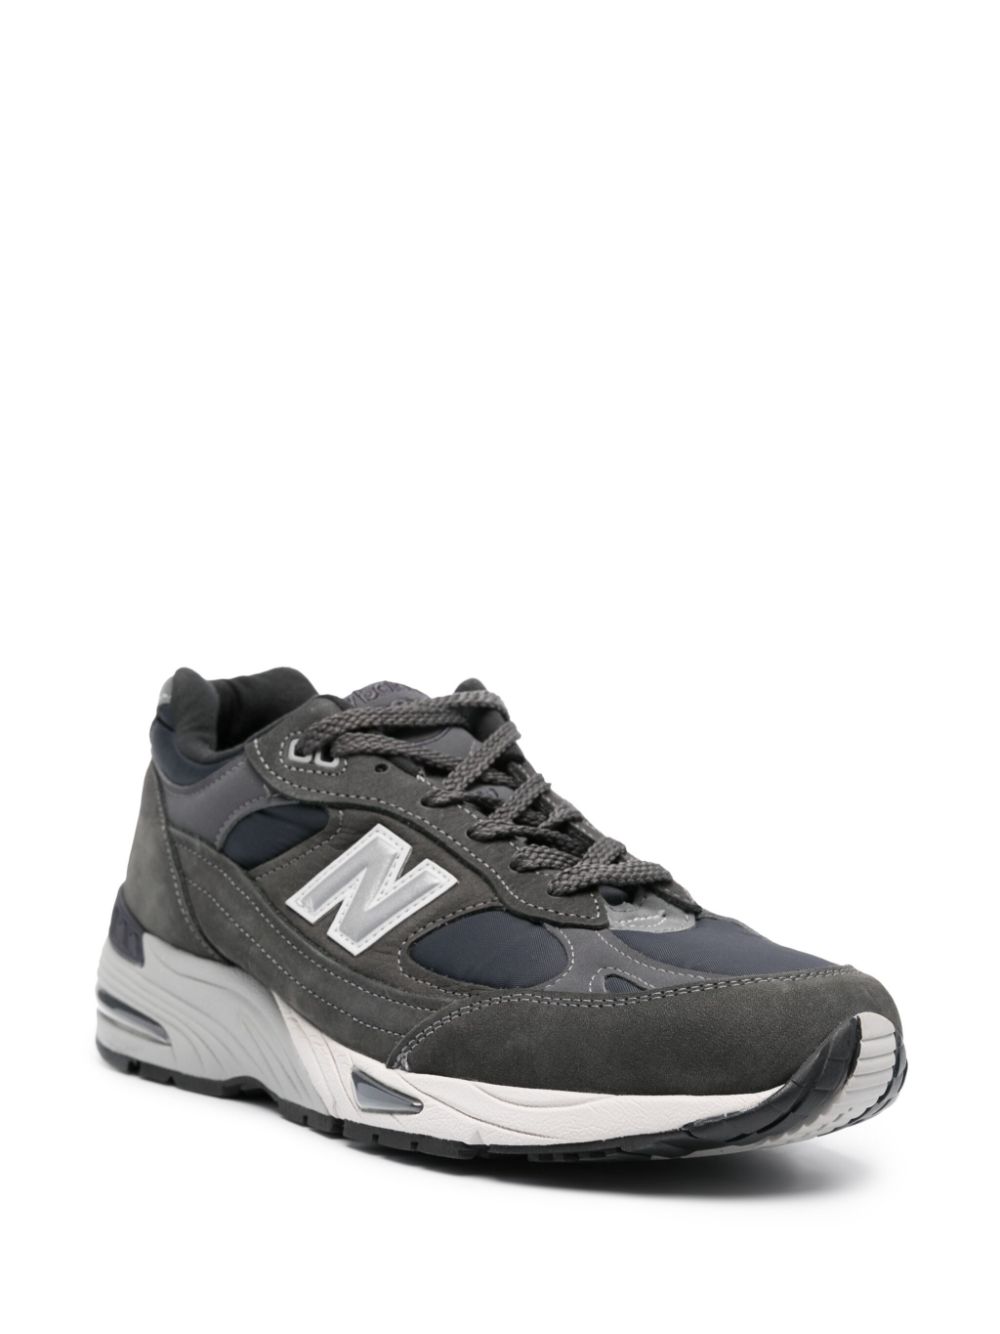 Image 2 of New Balance Made in UK 991v1 sneakers